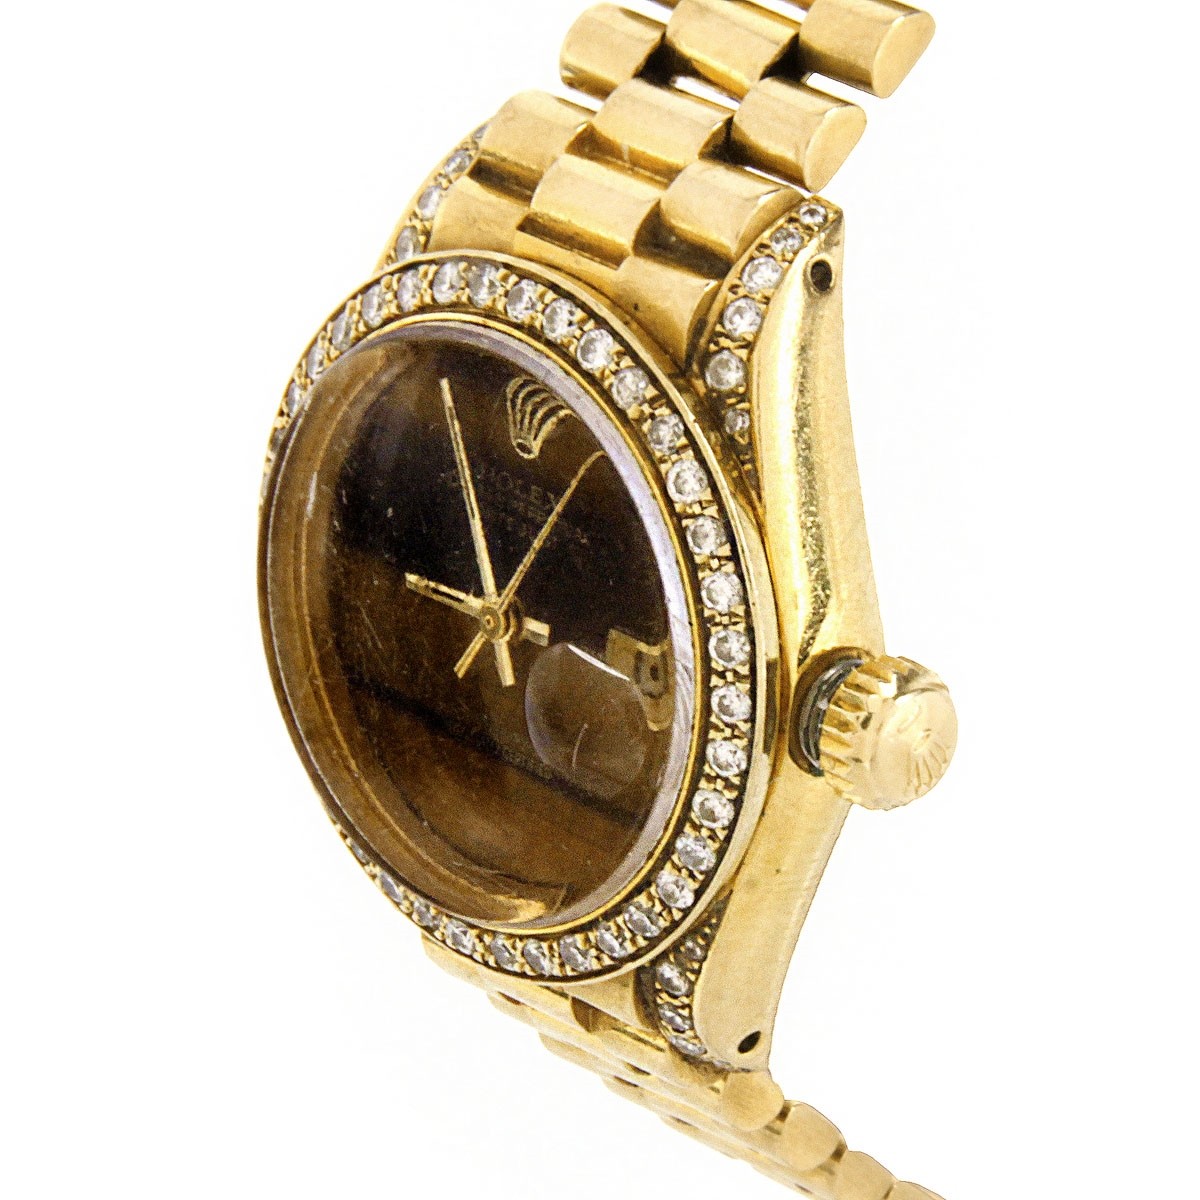 Lady's Vintage Rolex 18K Presidential Date-Just - Image 2 of 5